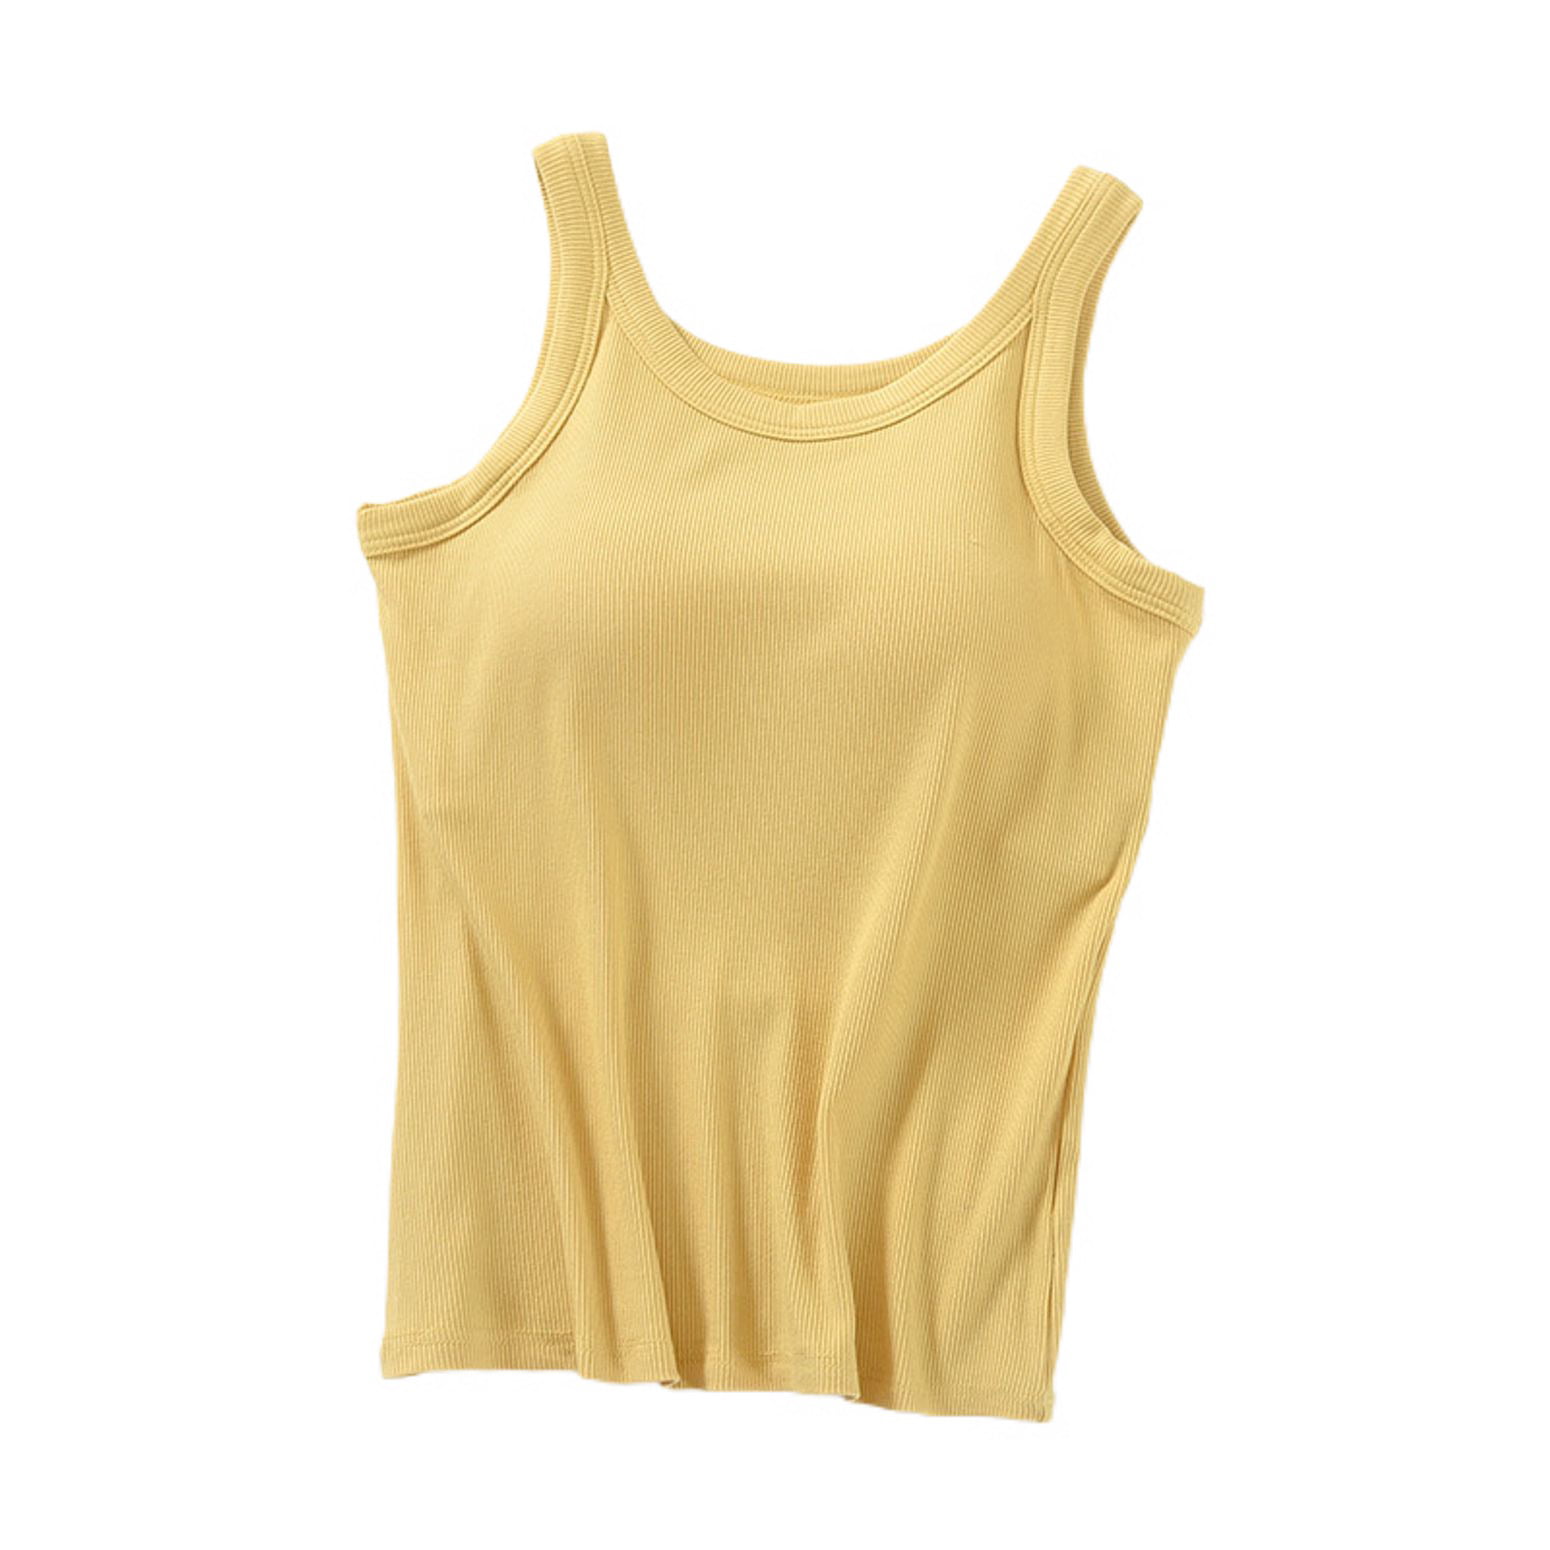 Homgro Women's Padded Tank Tops Workout Top Soft Ribbed Basic